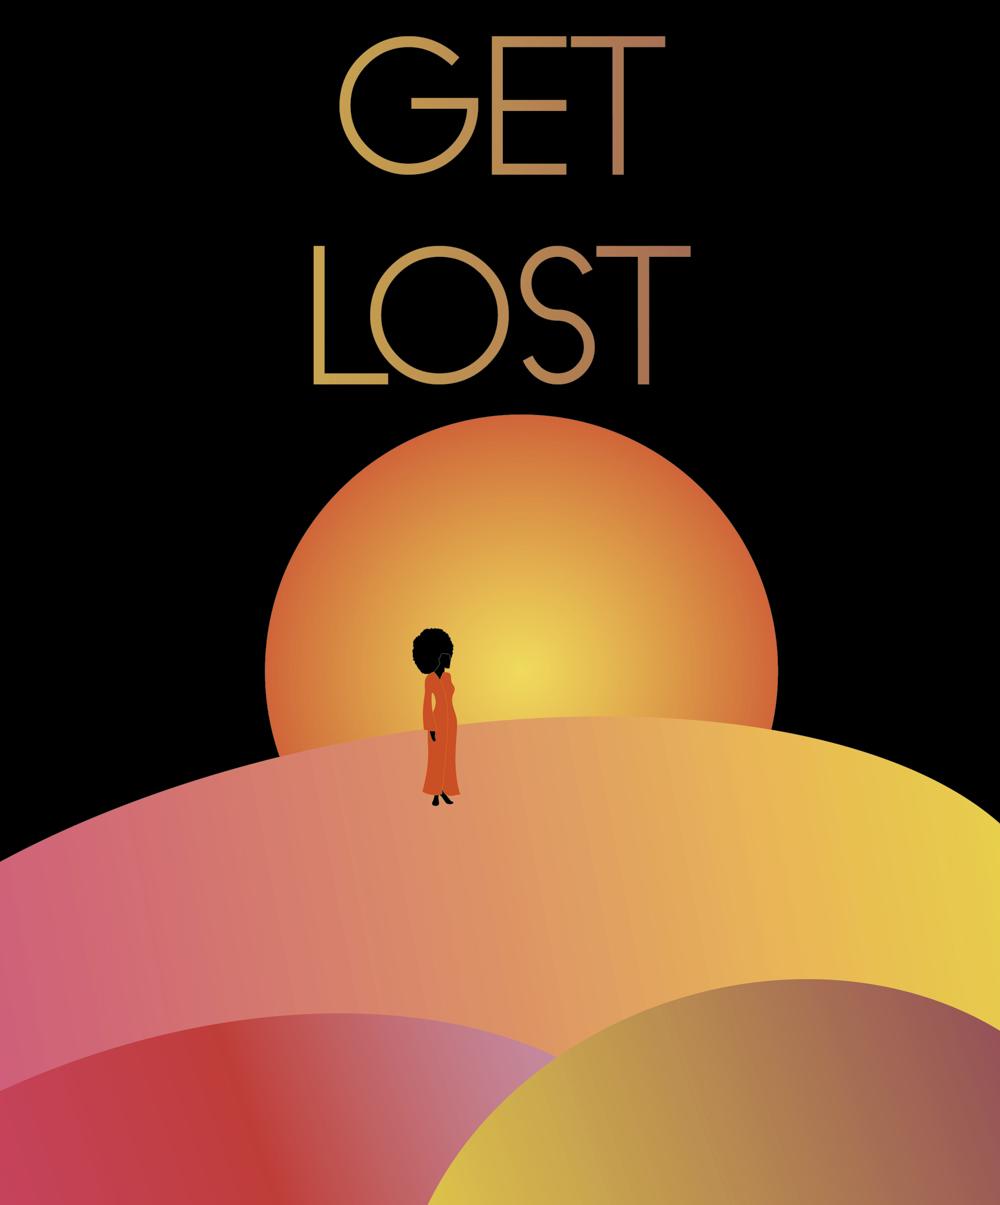 Get lost - a tiny figure of a Black woman with a beautiful Natural black Afro hairstyle, suggesting Alice Colrane, wanders/wanders in a meditative and colourful landscape, reflective of the worlds created within her music